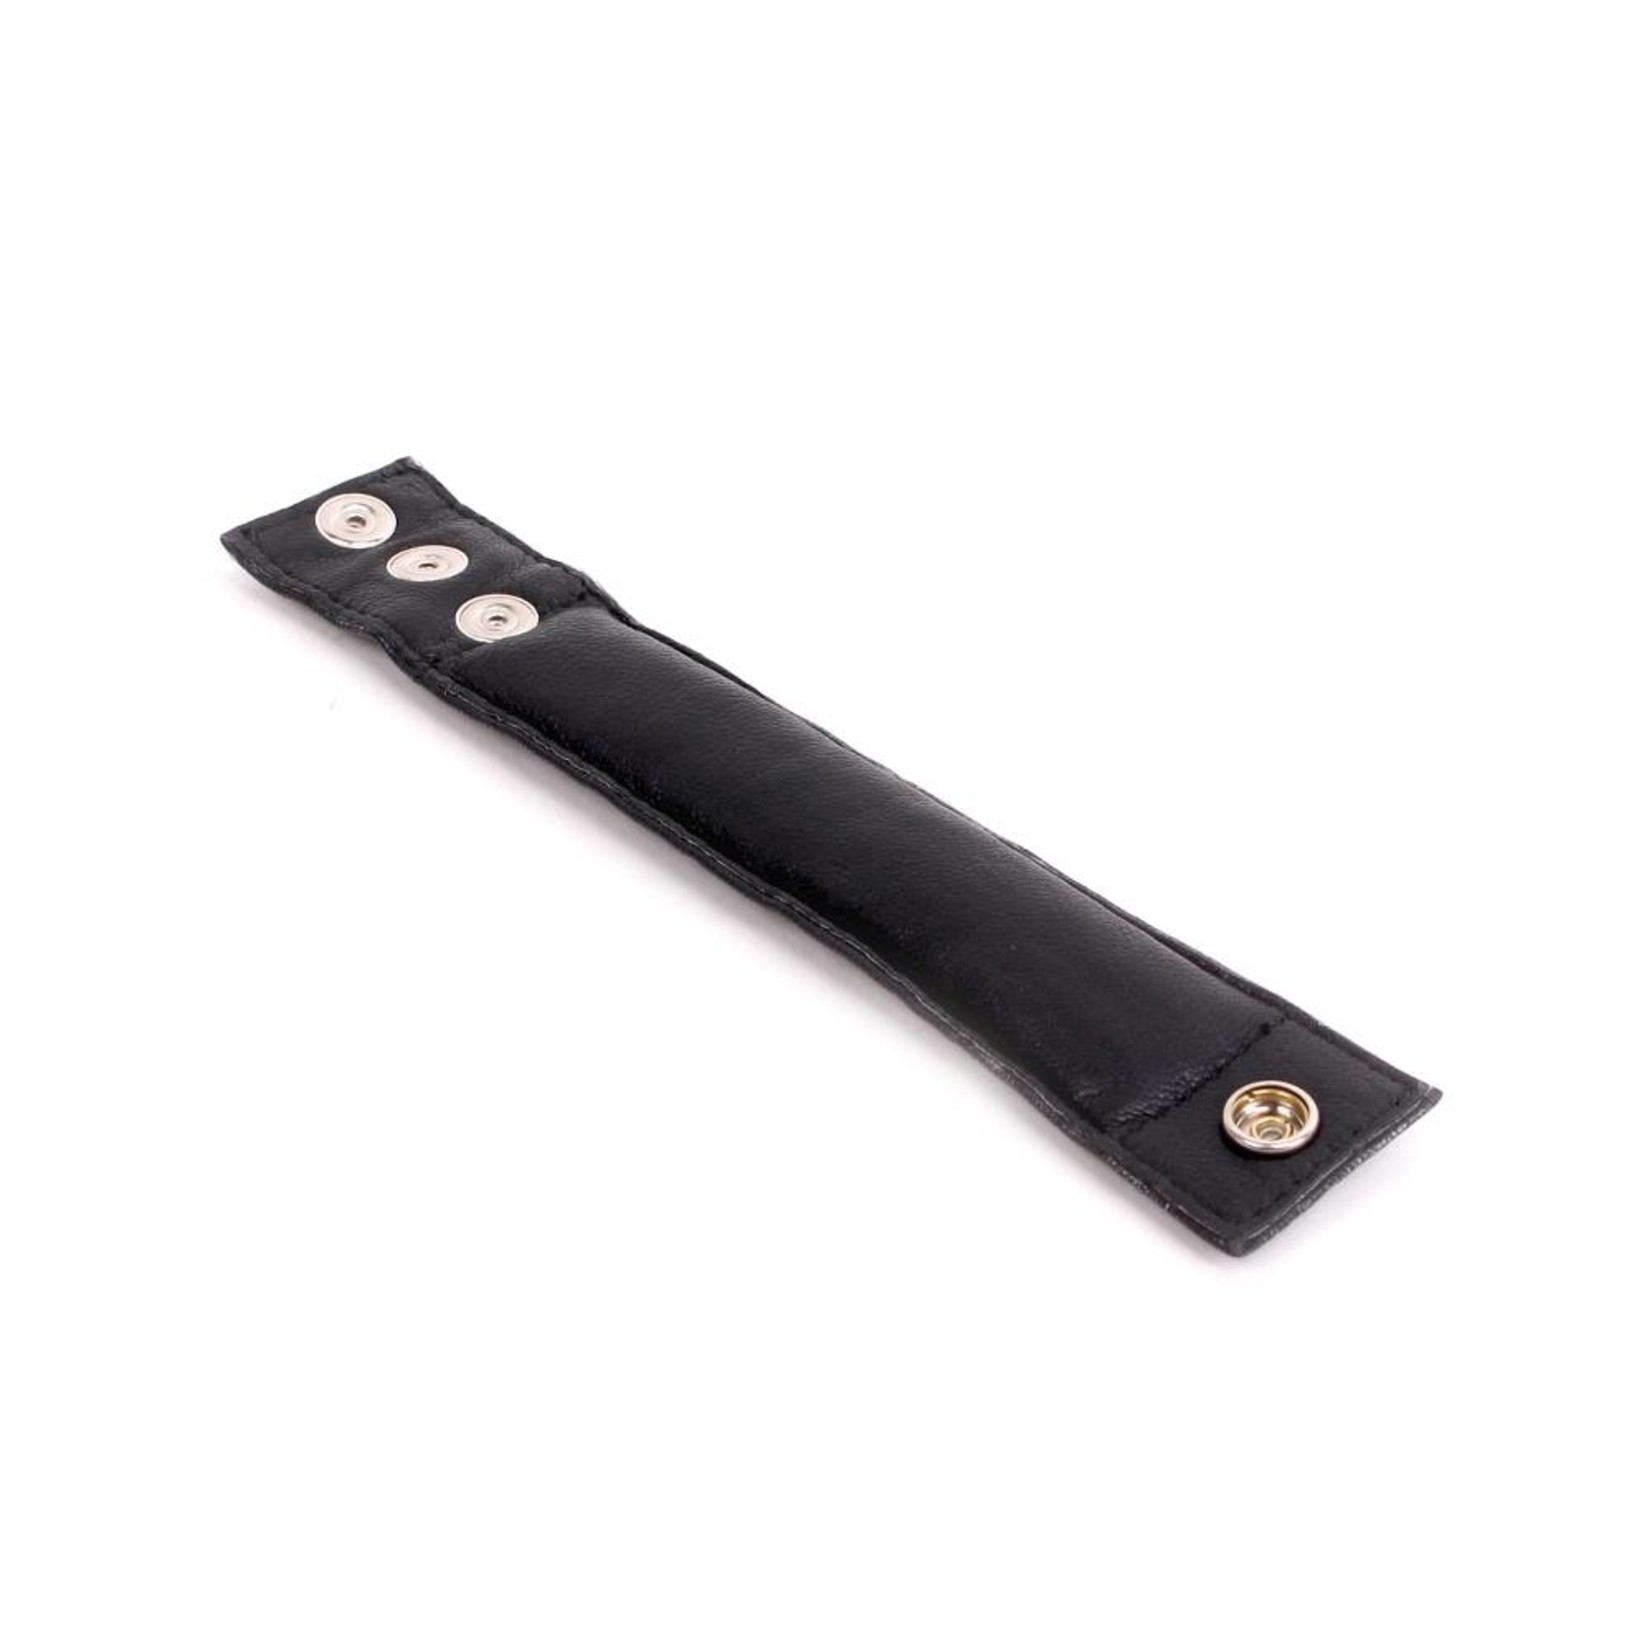 Leather-Ball-Weight-Stretcher-S-OPR-2960021-2